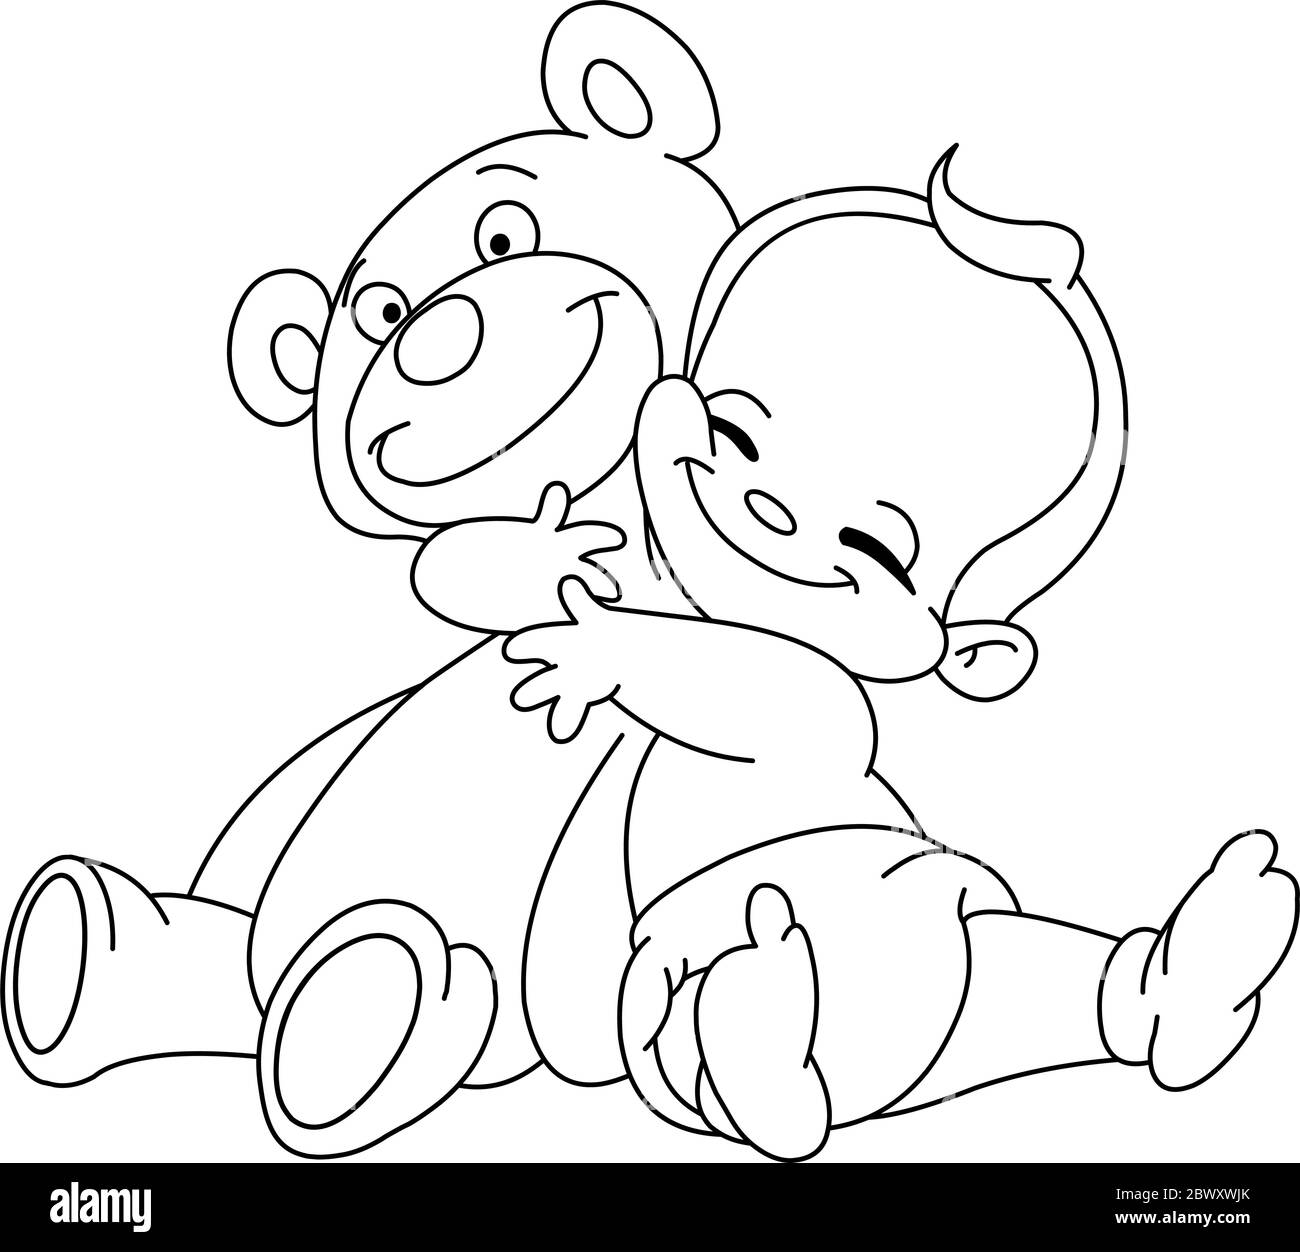 Outlined Cheerful baby hugging his teddy bear Stock Vector